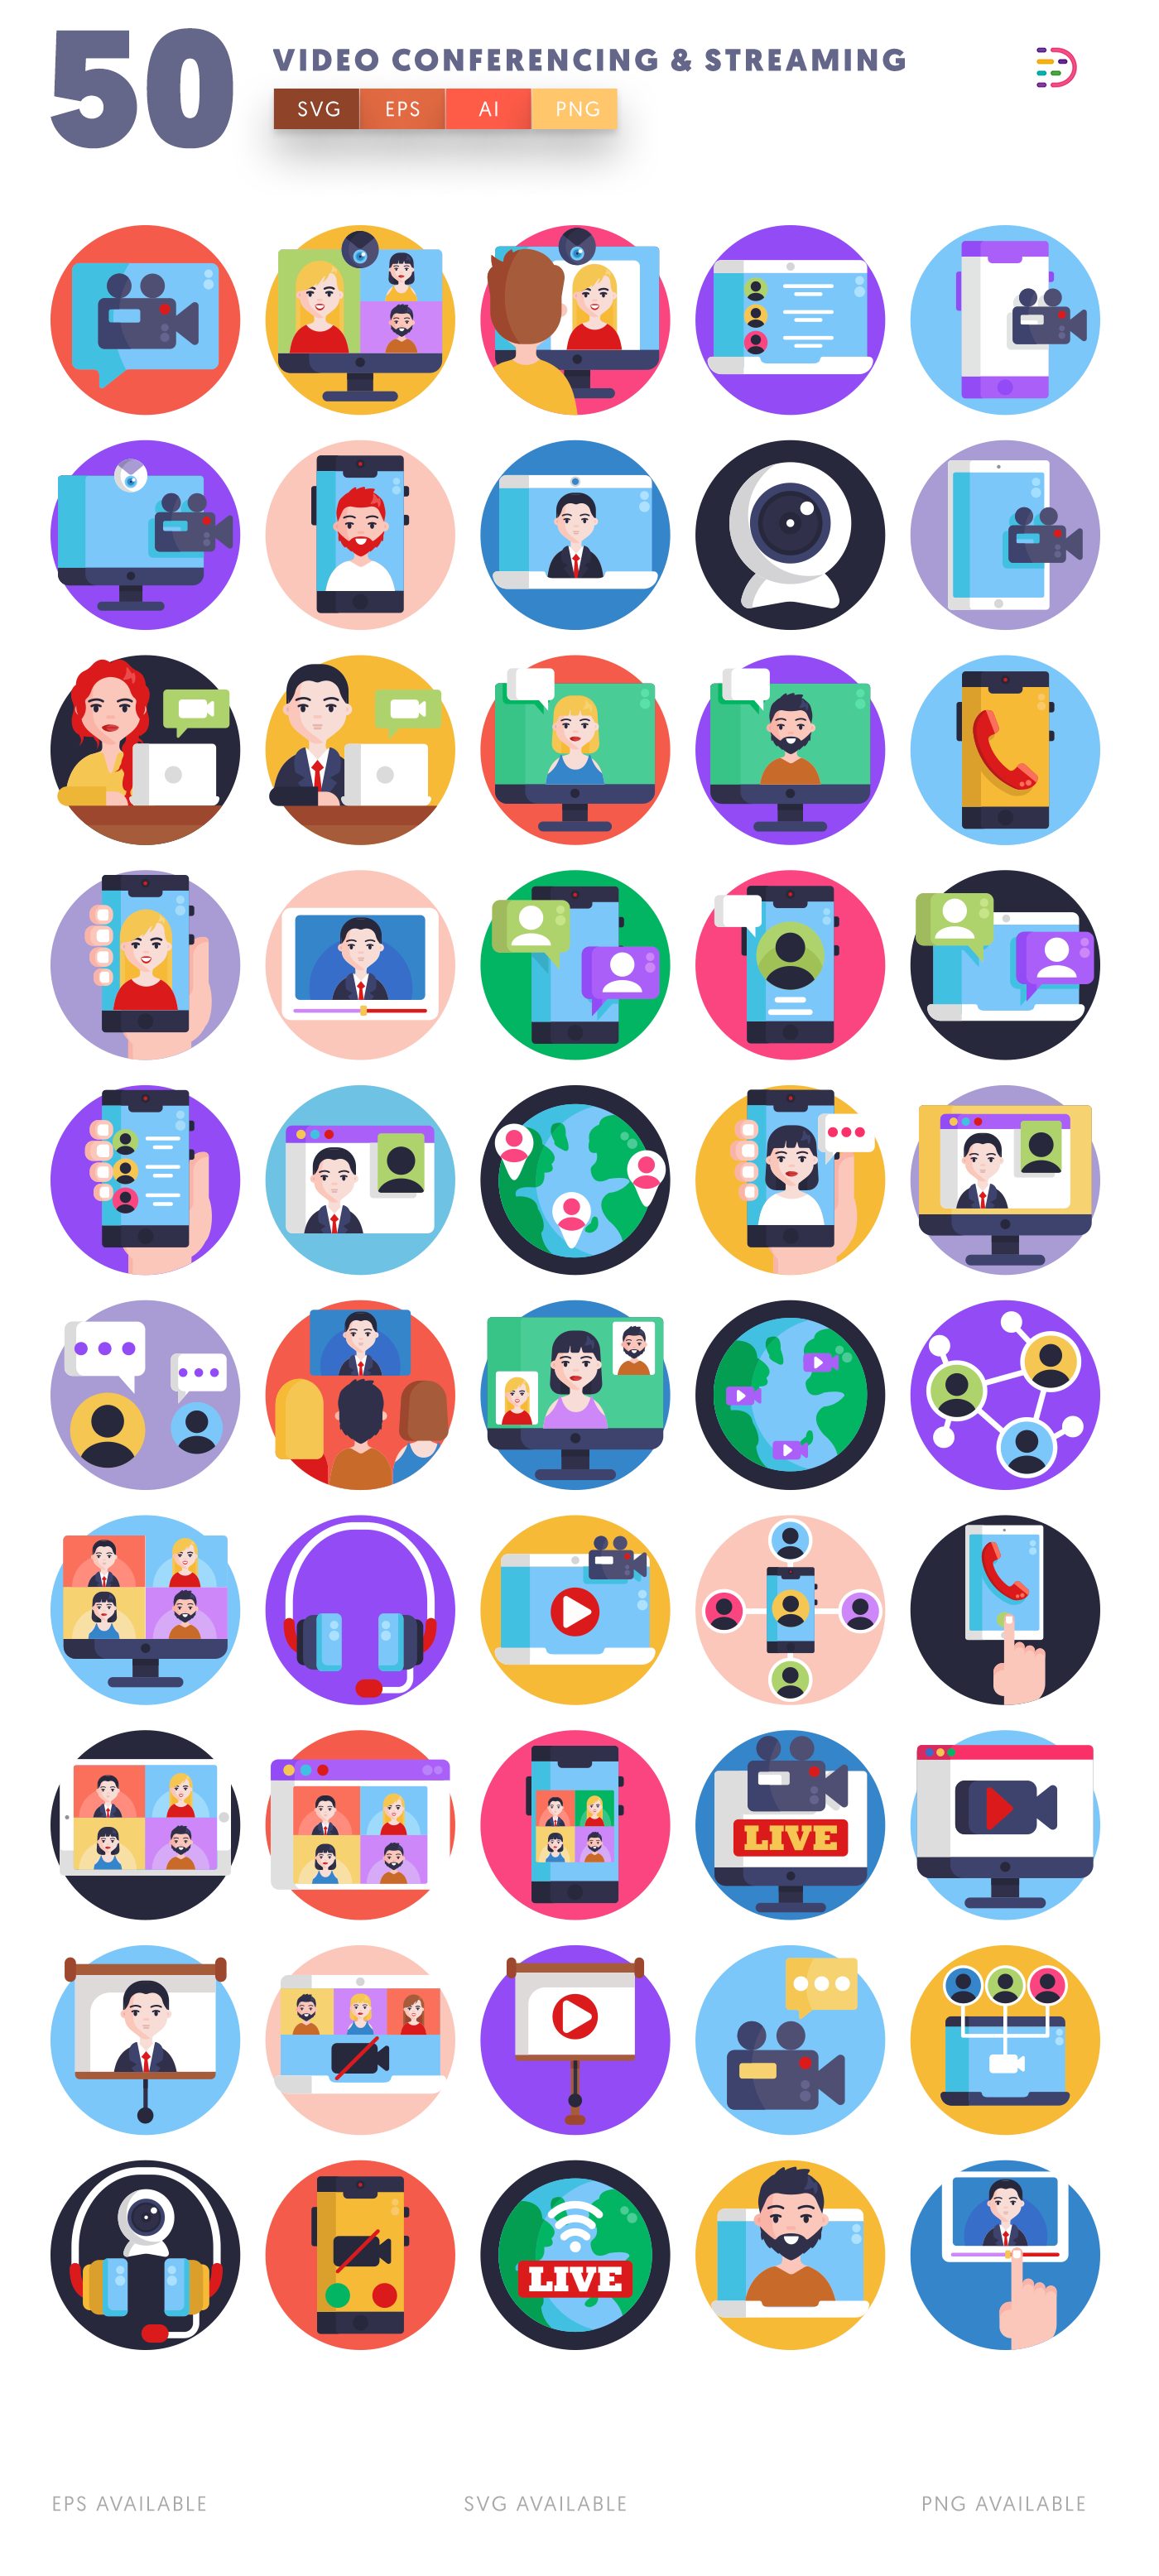 Video Conference and Streaming icon pack